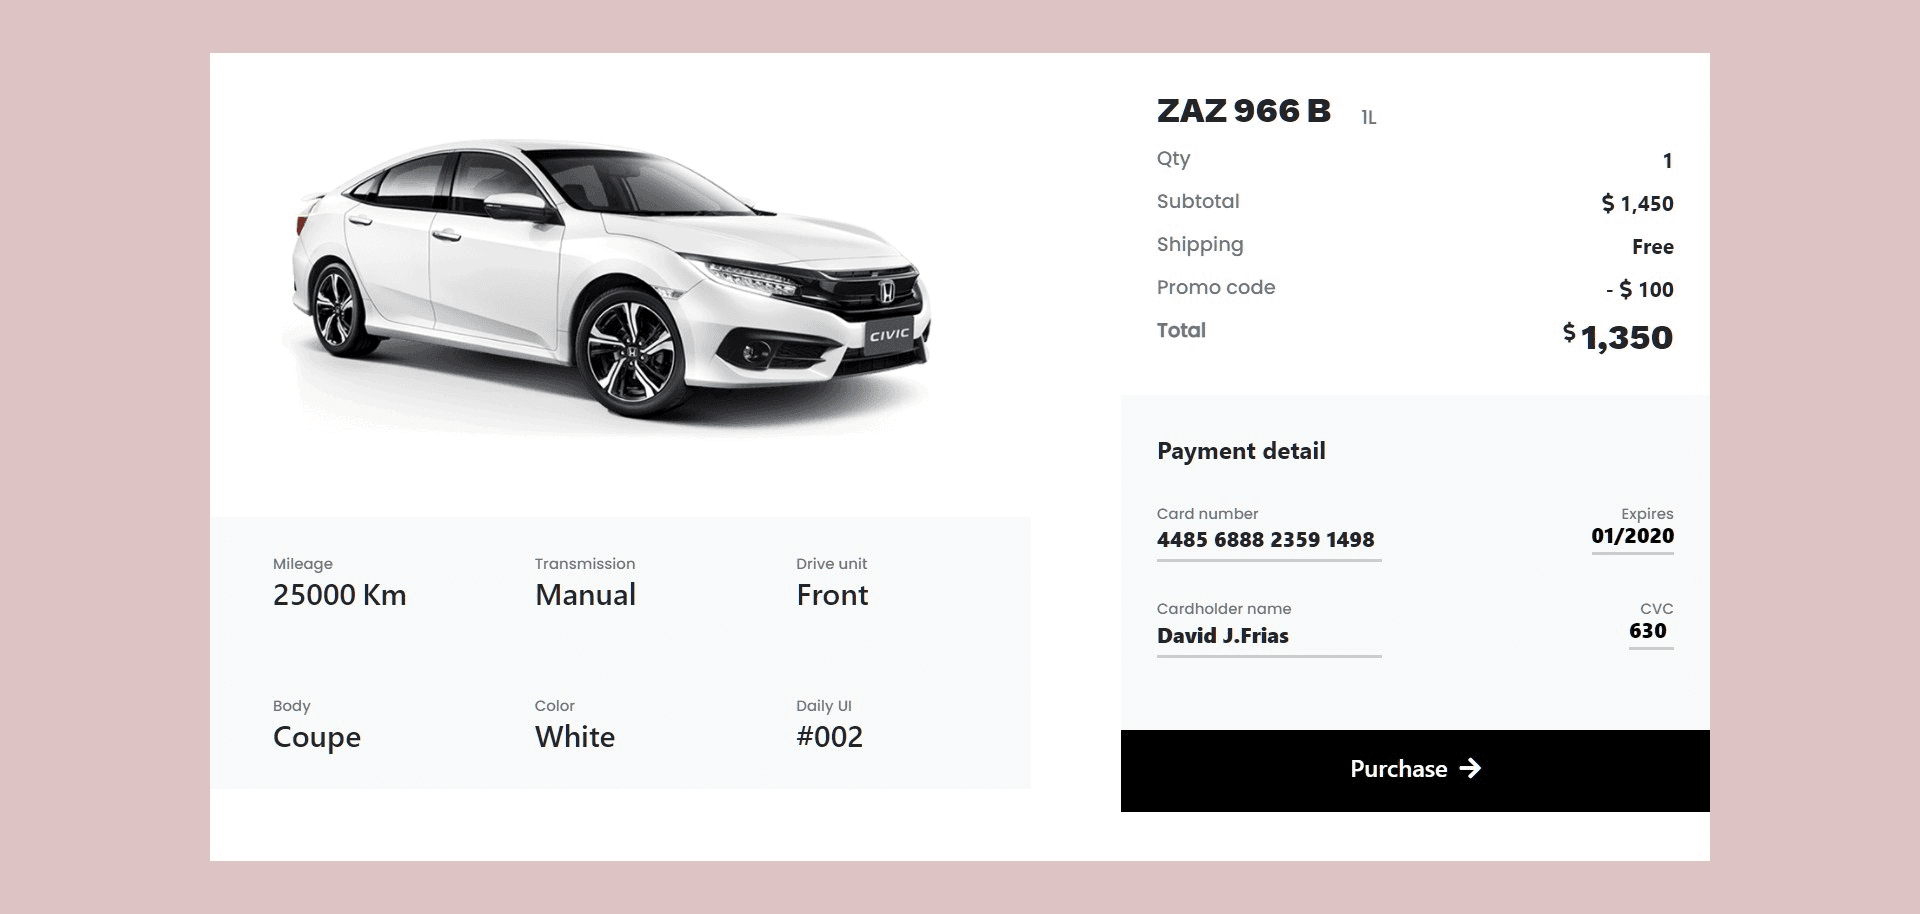 Vehicle features with payment details